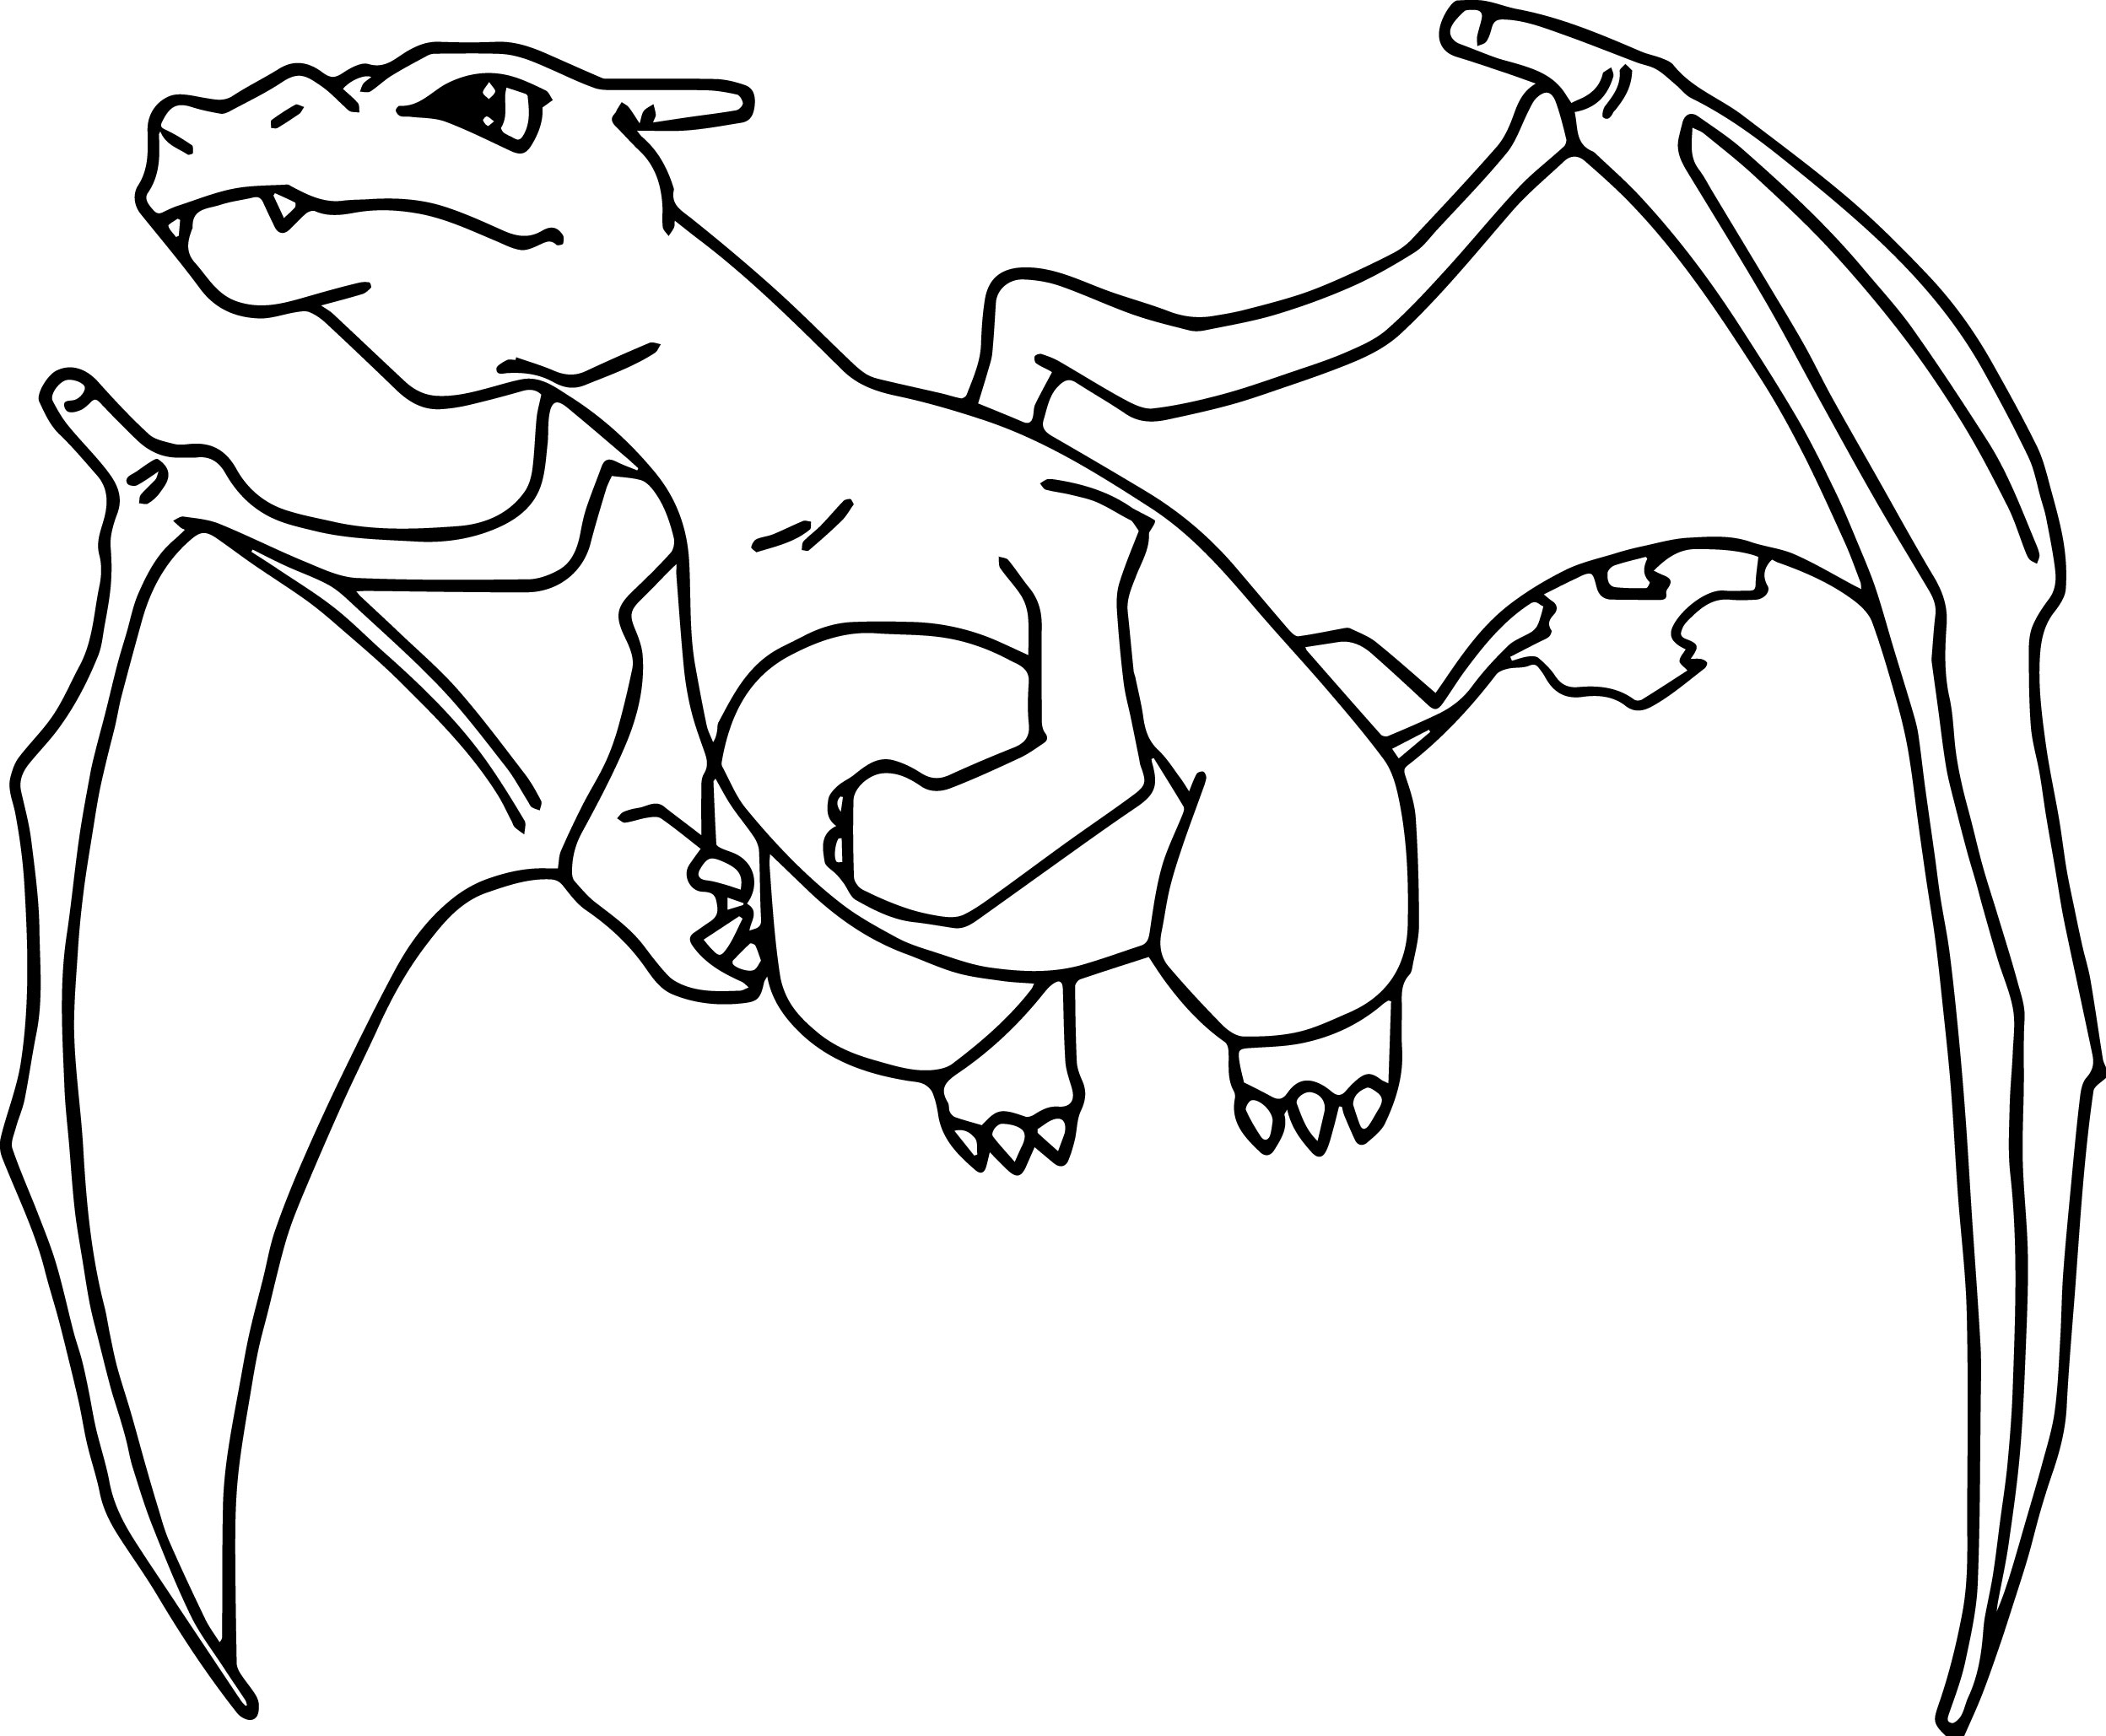 charizard coloring page